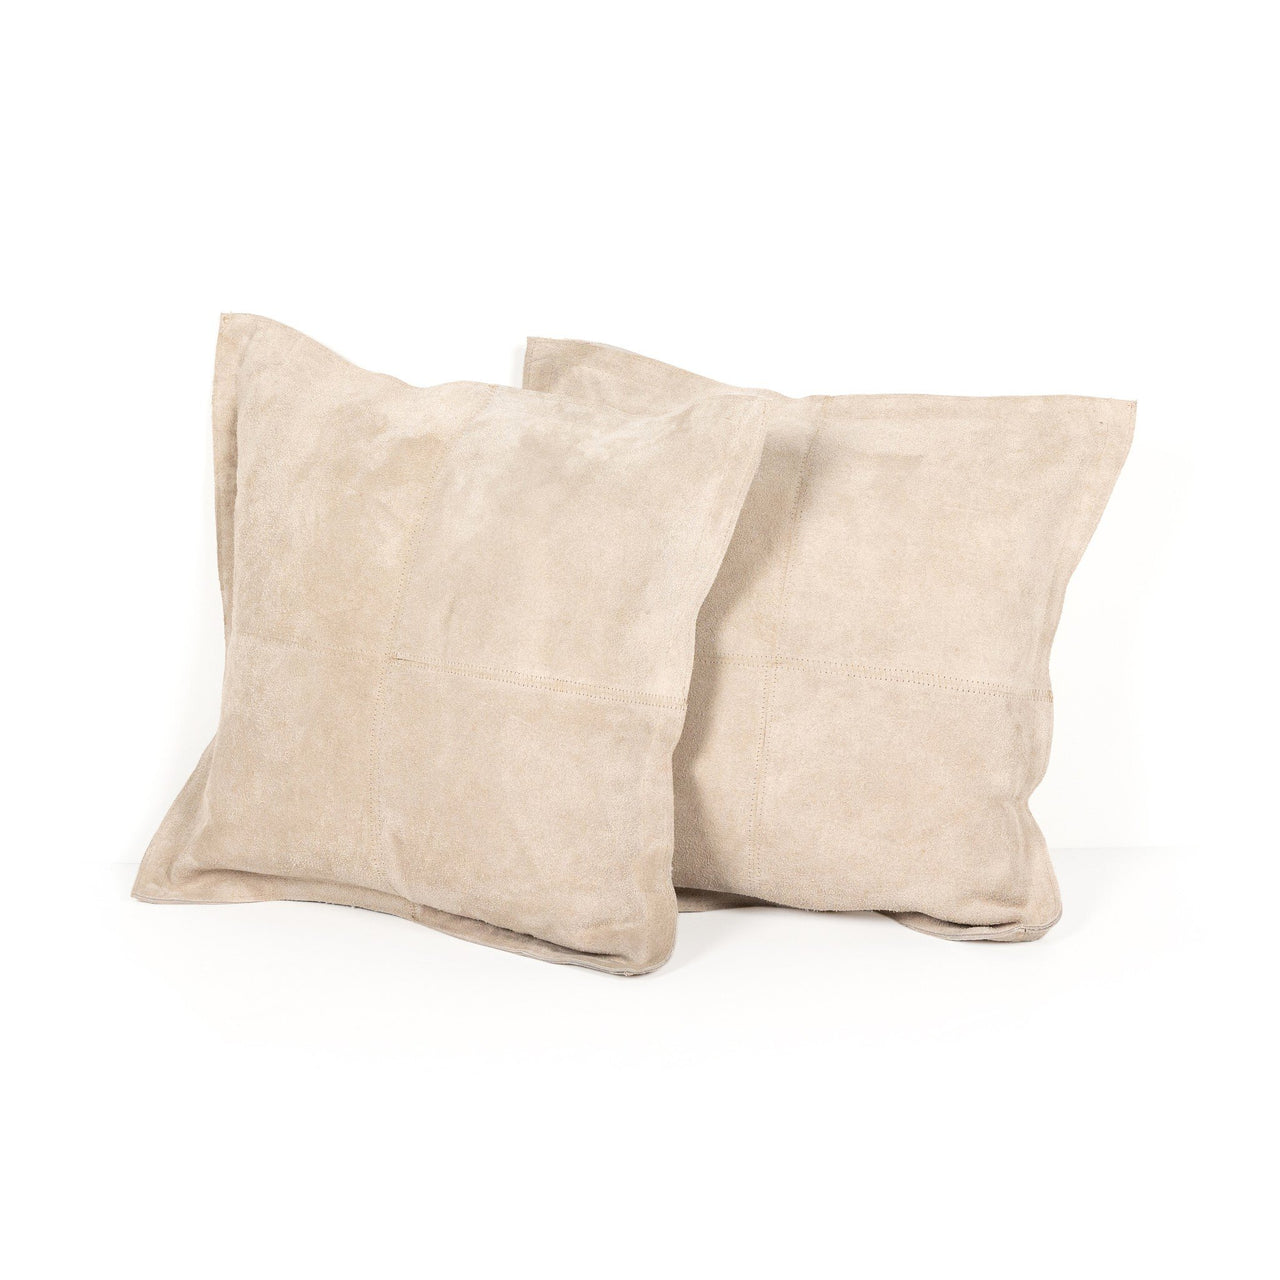 Sophie Pillow Set of 2